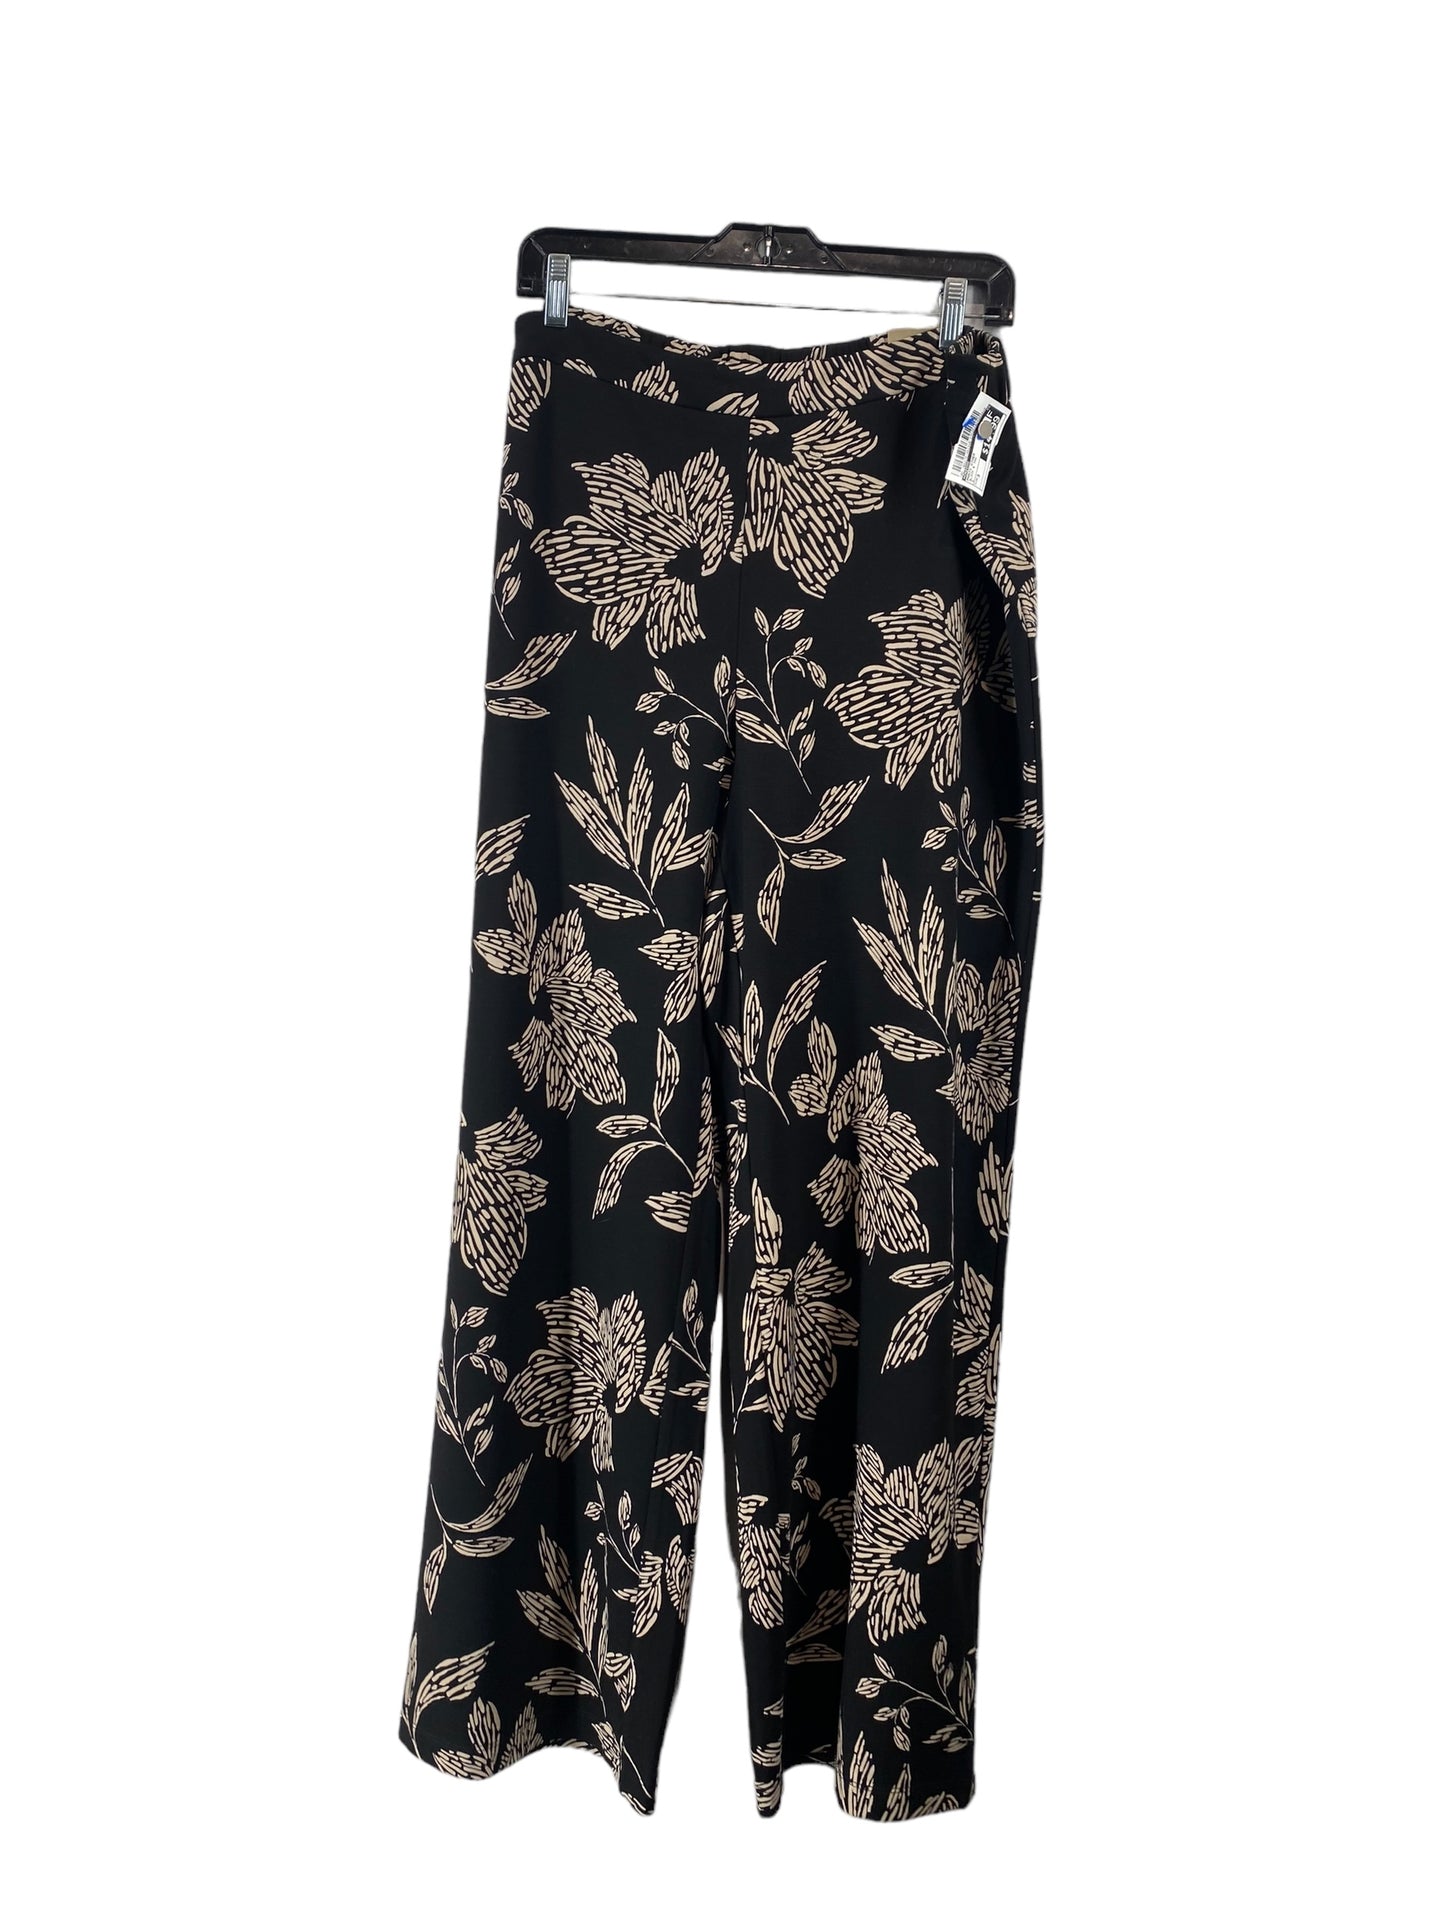 Black & Tan Pants Other Chicos, Size 3